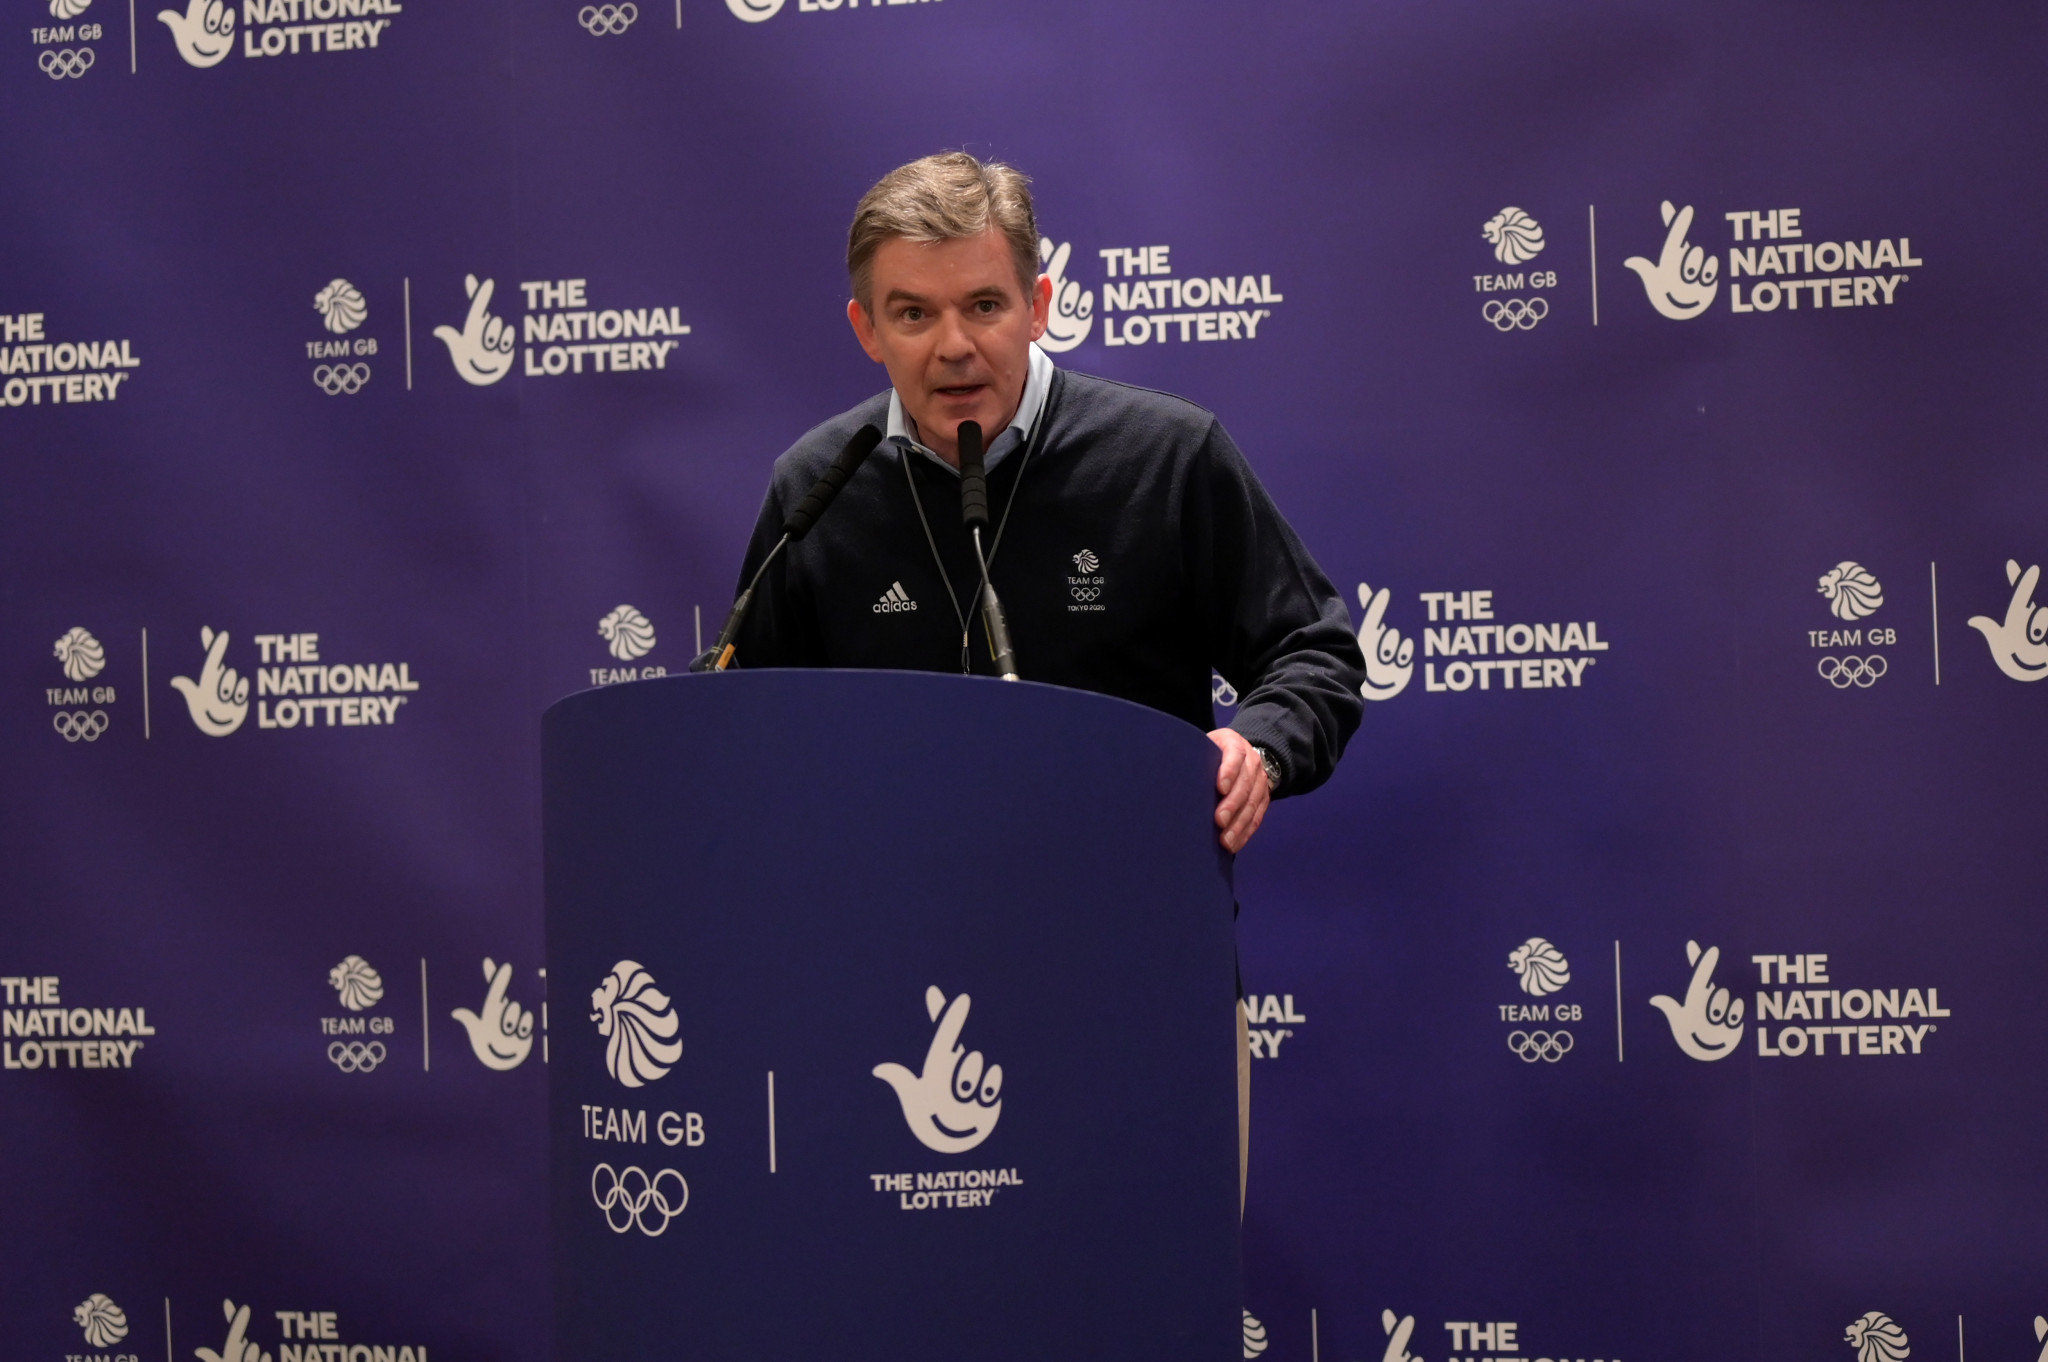 British Olympic Association chairman Sir Hugh Robertson is also chairman of Camelot, which is bidding to win the National Lottery contract again ©Getty Images